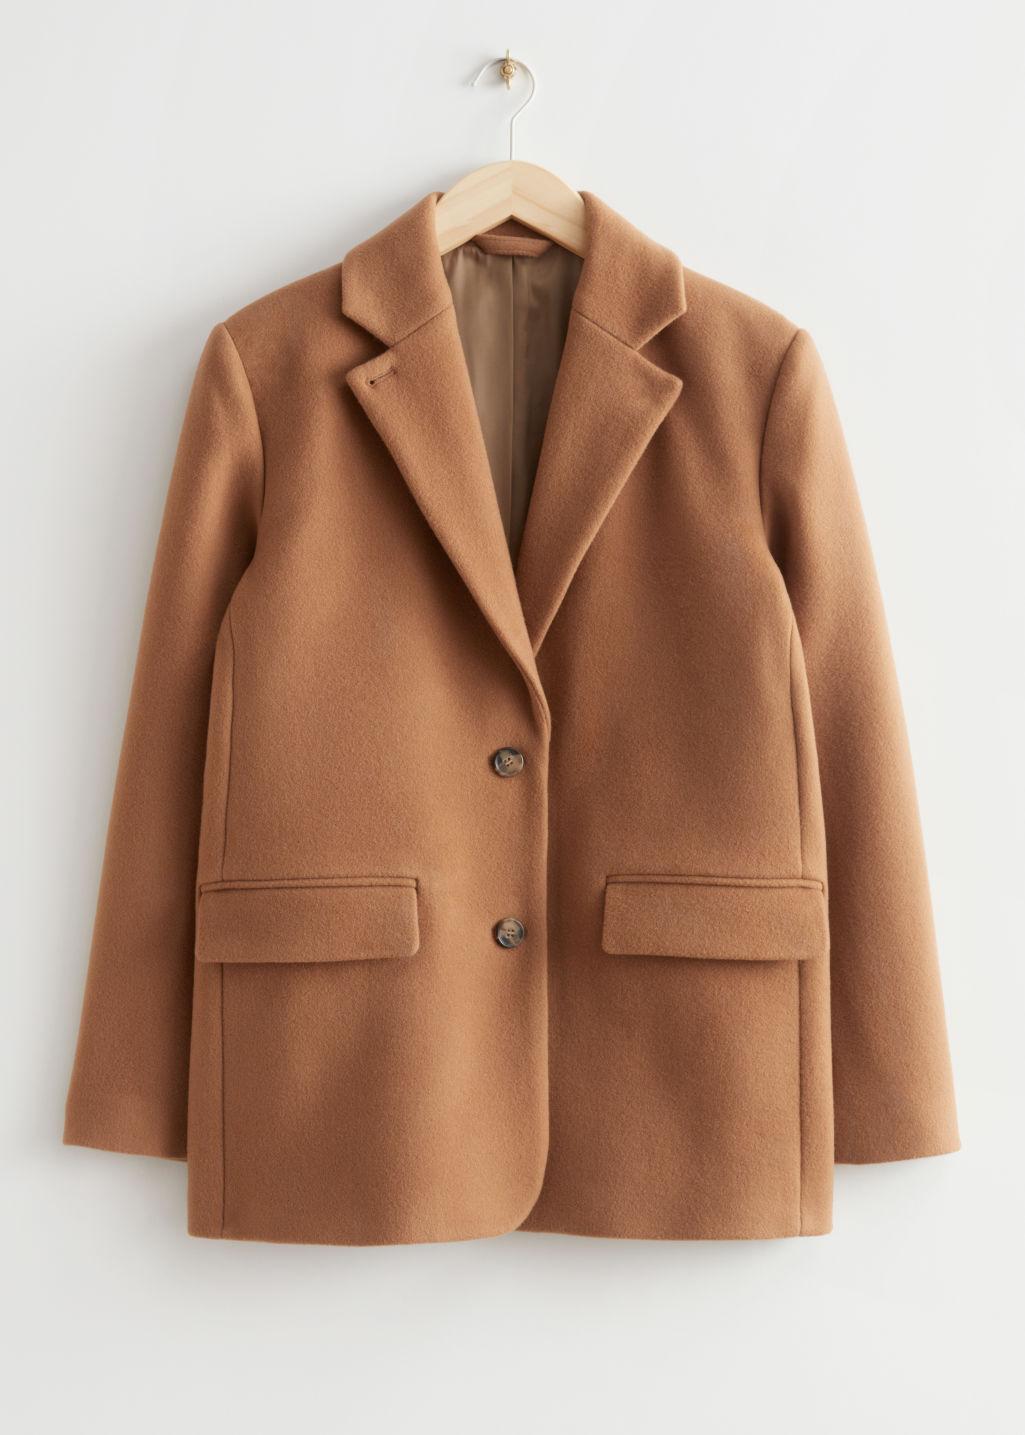 Other Stories Oversized Wool Blazer in Natural | Lyst